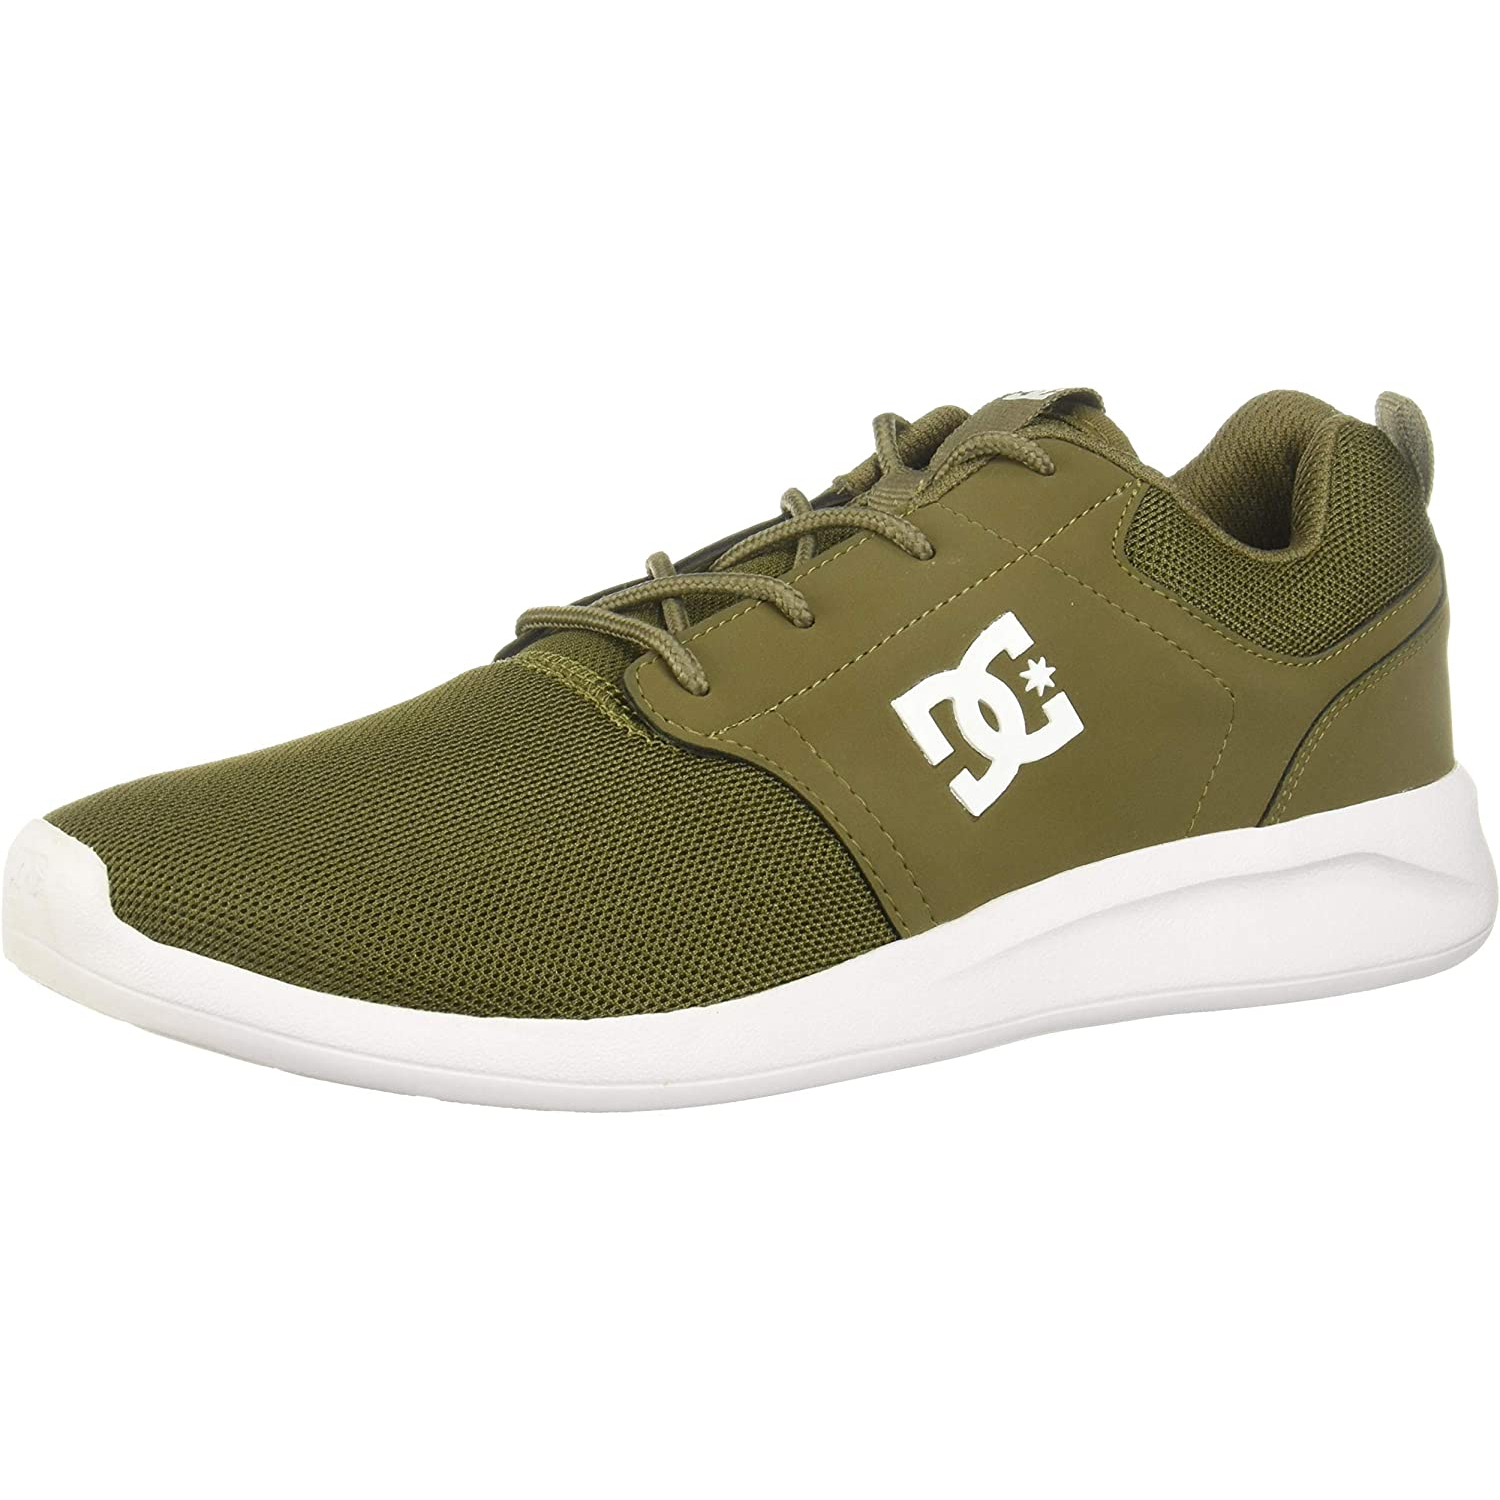 Tenis DC Hombre MIDWAY SN MX Olive/Green